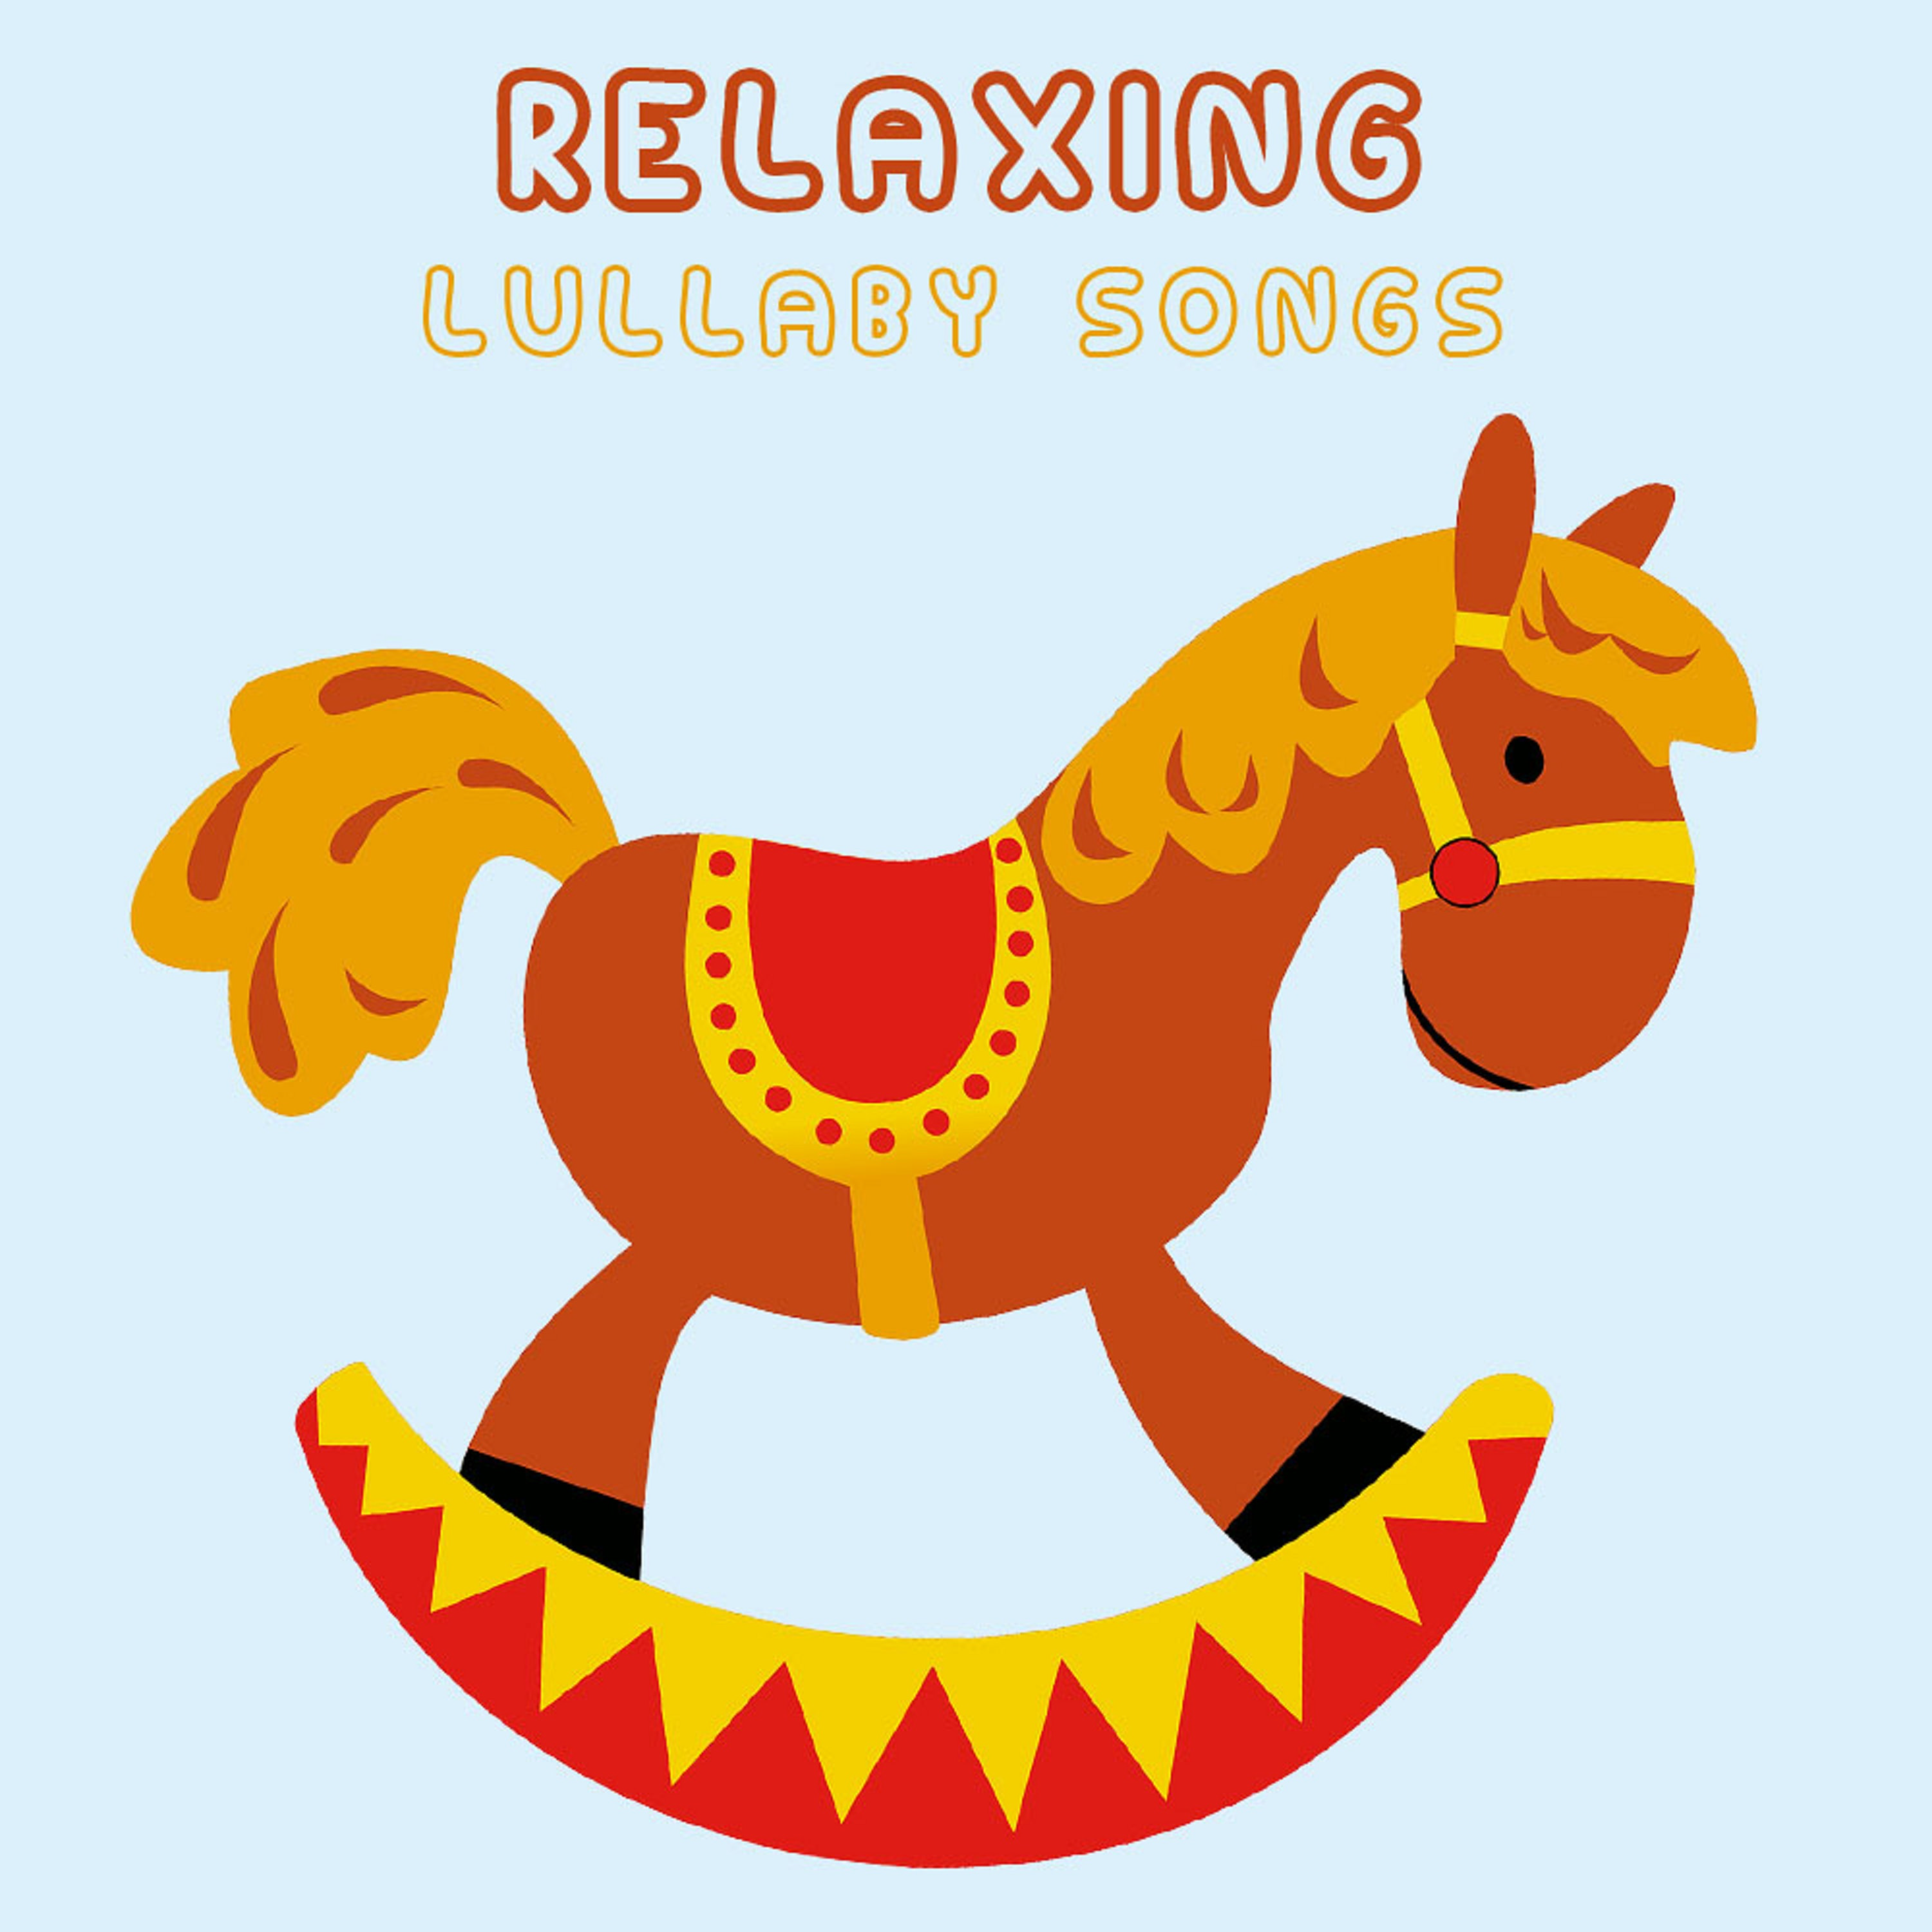 #15 Relaxing Lullaby Songs